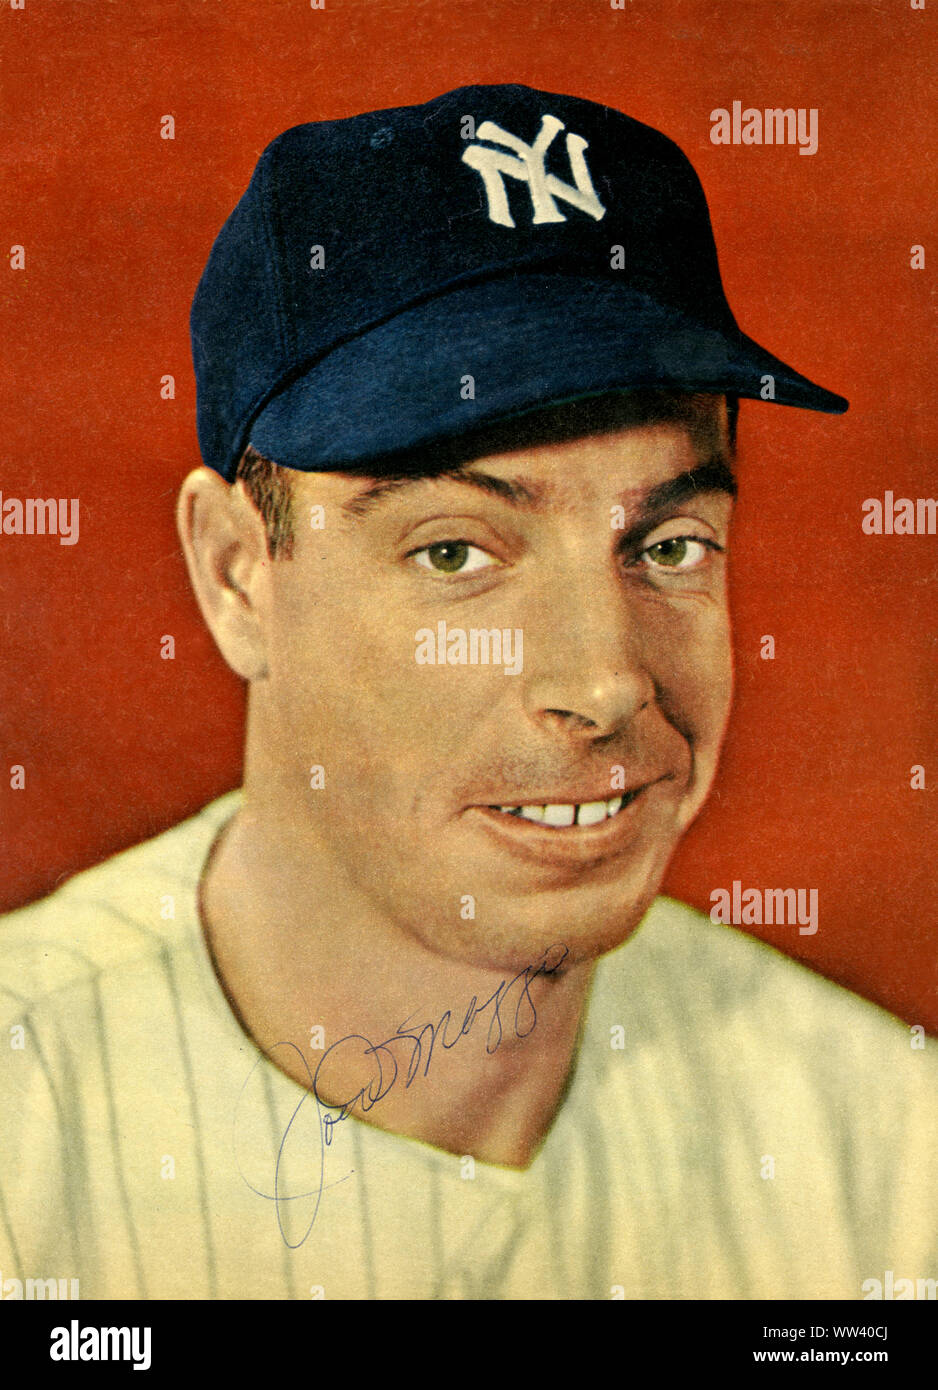 Autographed photo of Joe DiMaggio the iconic superstar baseball player with  the New York Yankees who was married to Marilyn Monroe Stock Photo - Alamy